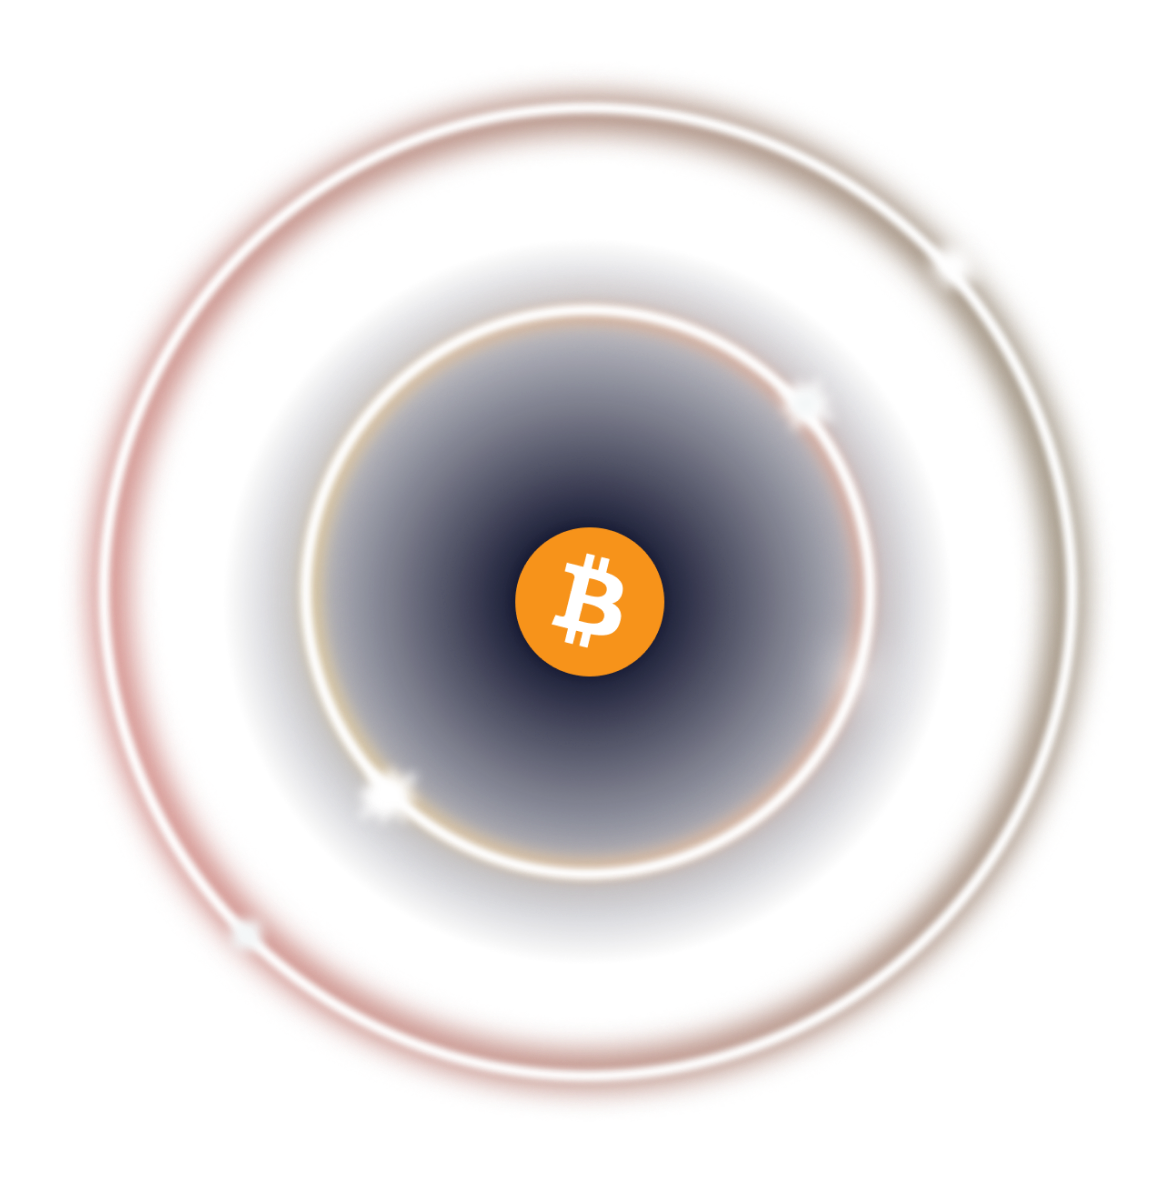 A Stylized Bitcoin logo with lens flare.